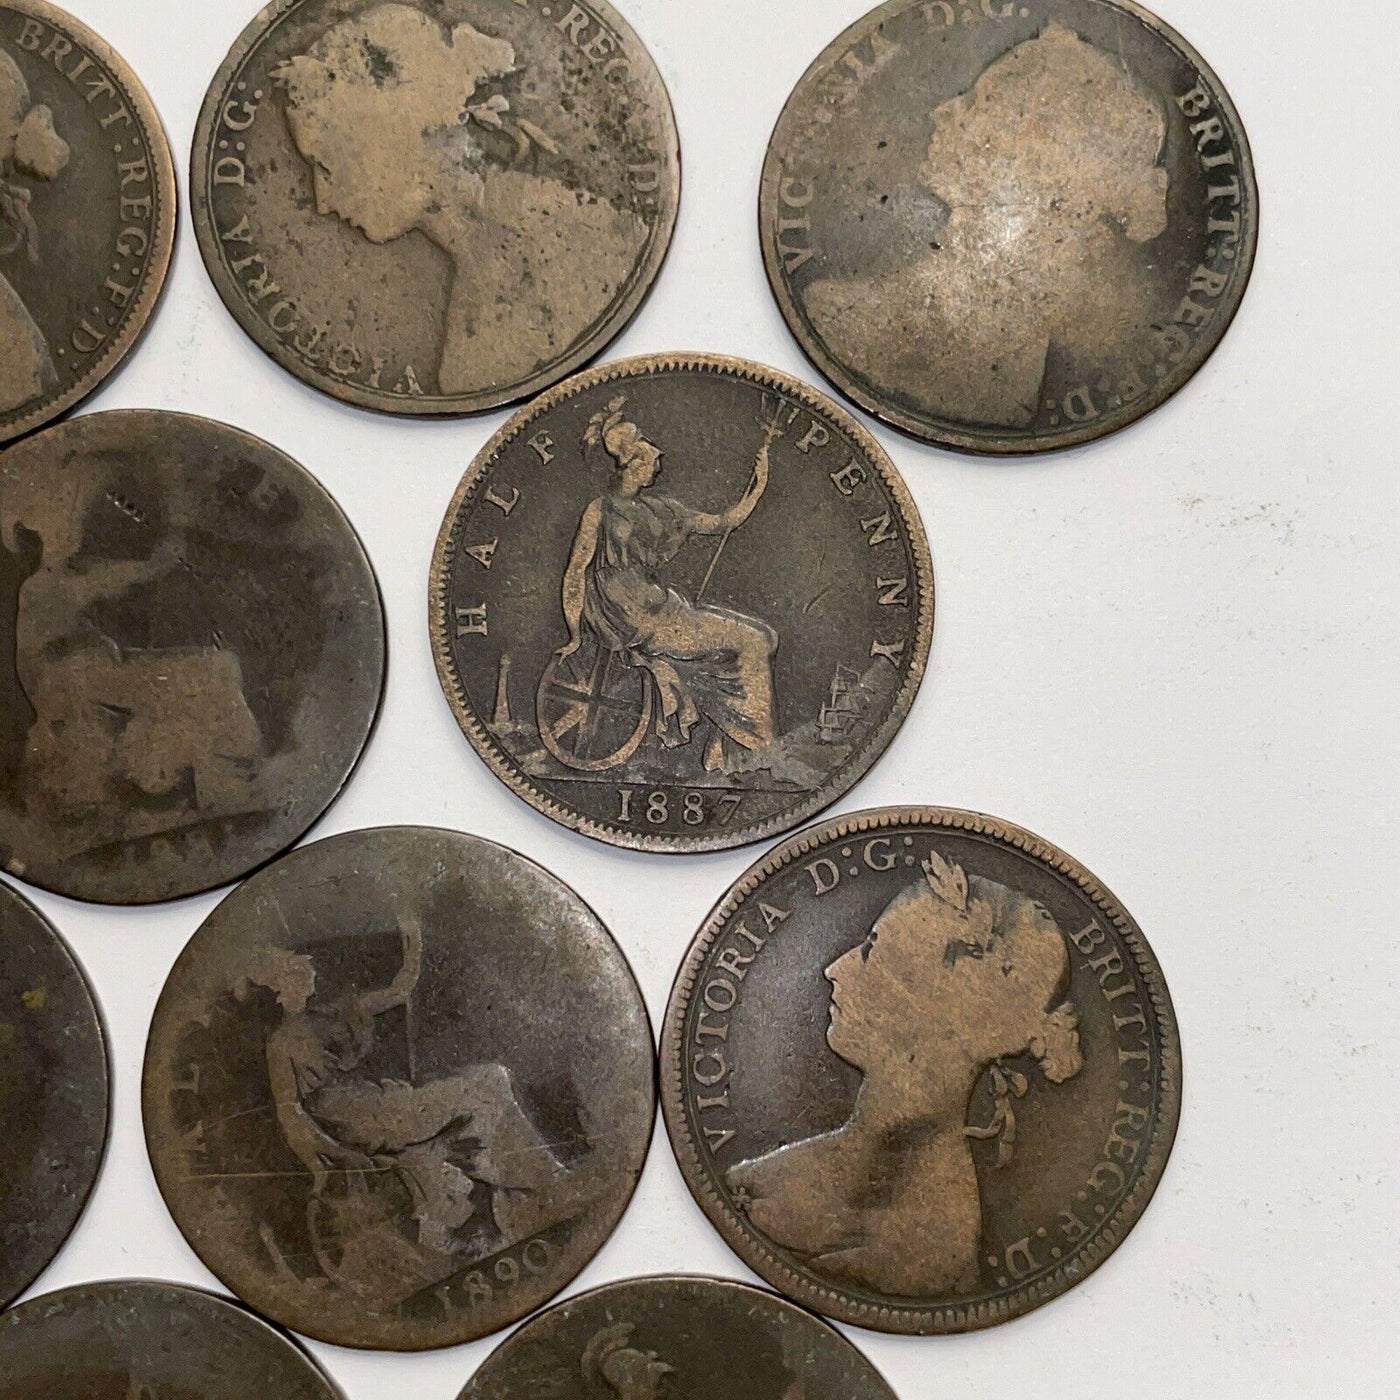 17 different English Half Penny Coppers nice collection 1861 to 1901 - US CoinSpot